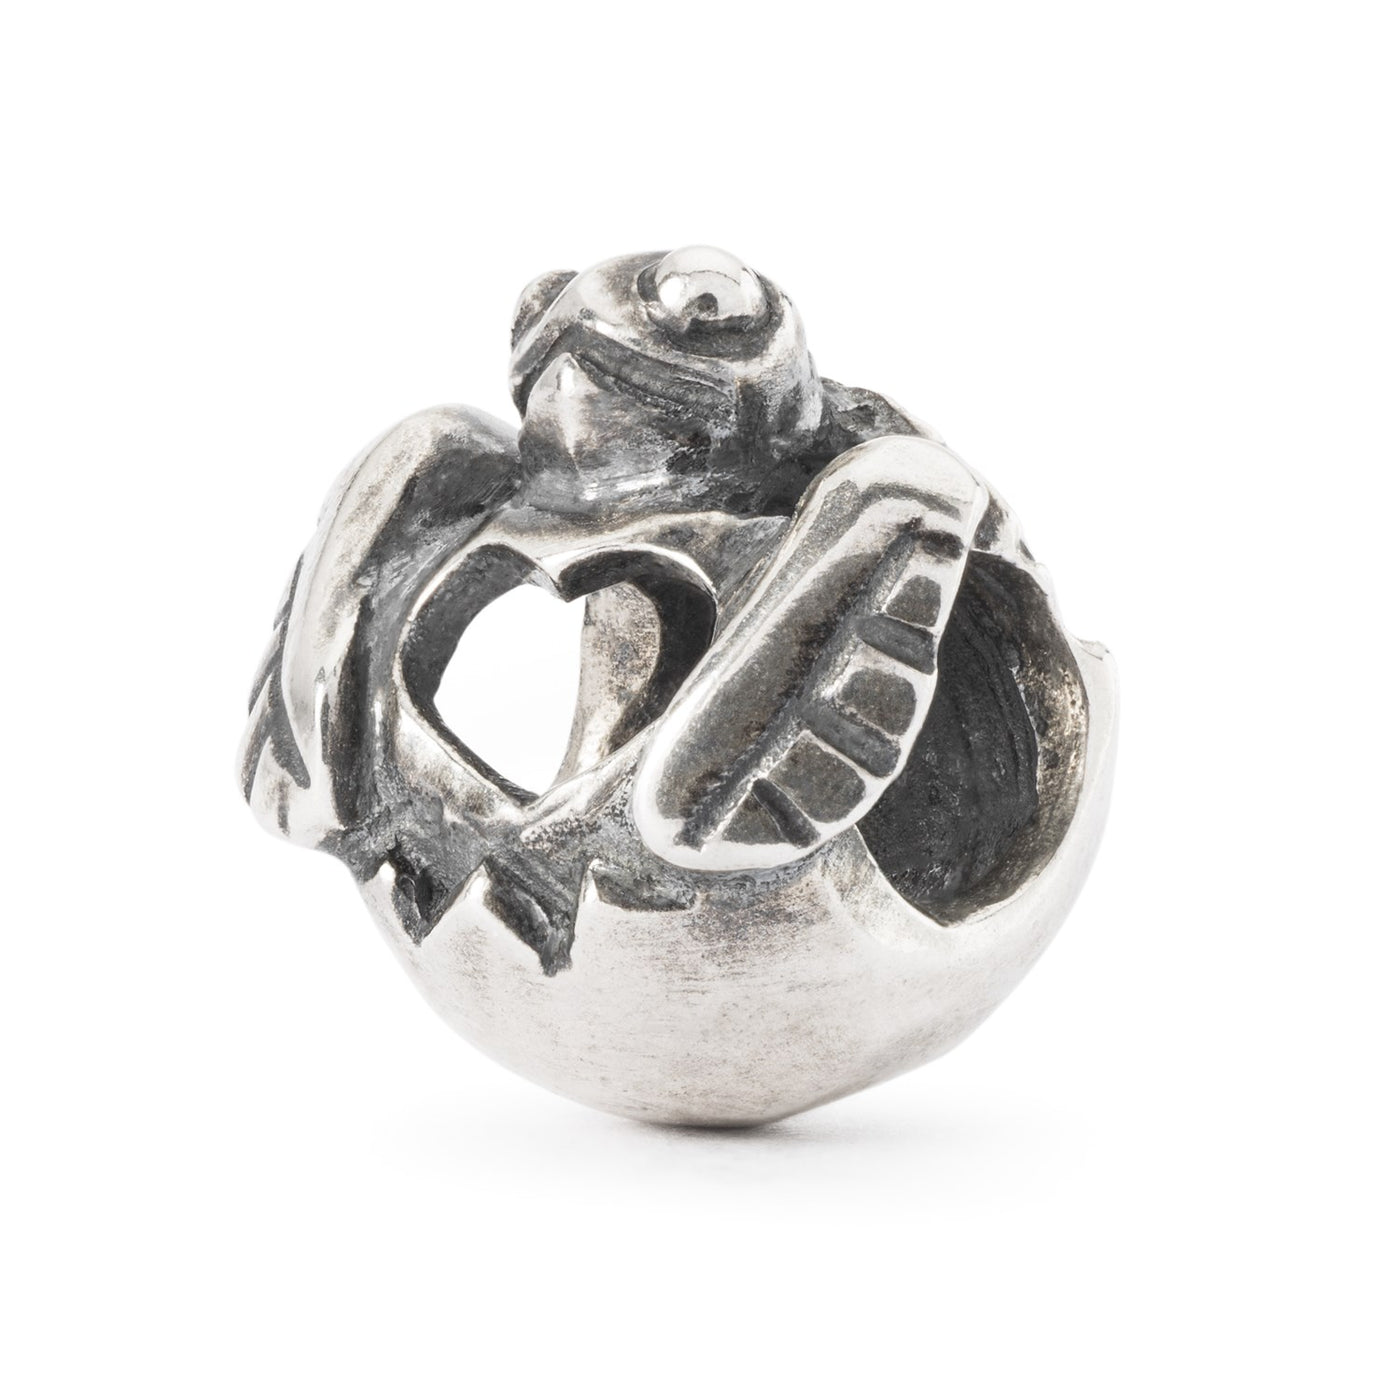 Force of life turtle jewellery bead in silver.